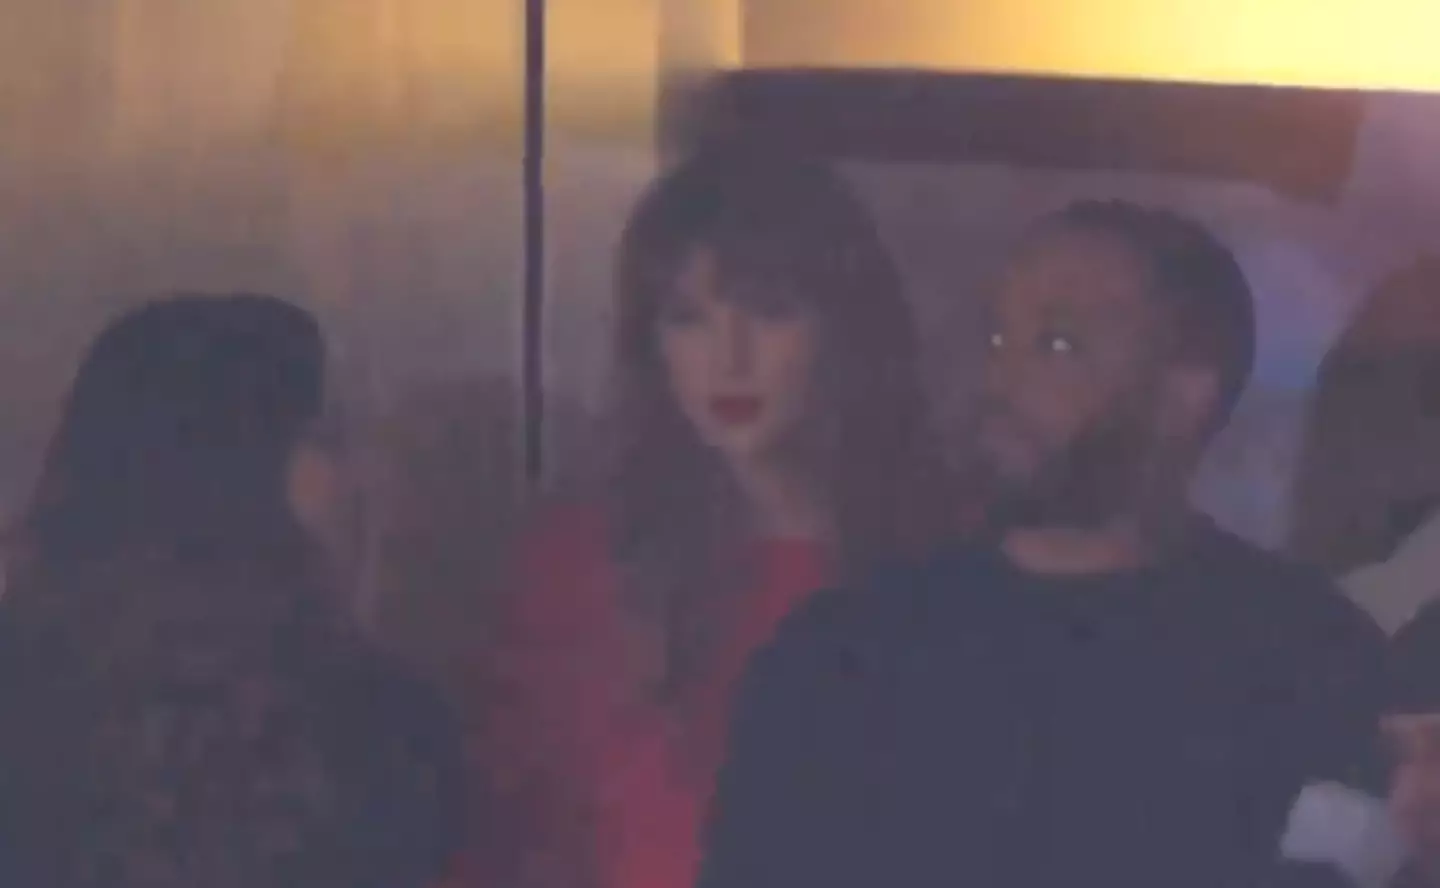 The cameras track Taylor Swift as she joins friends.